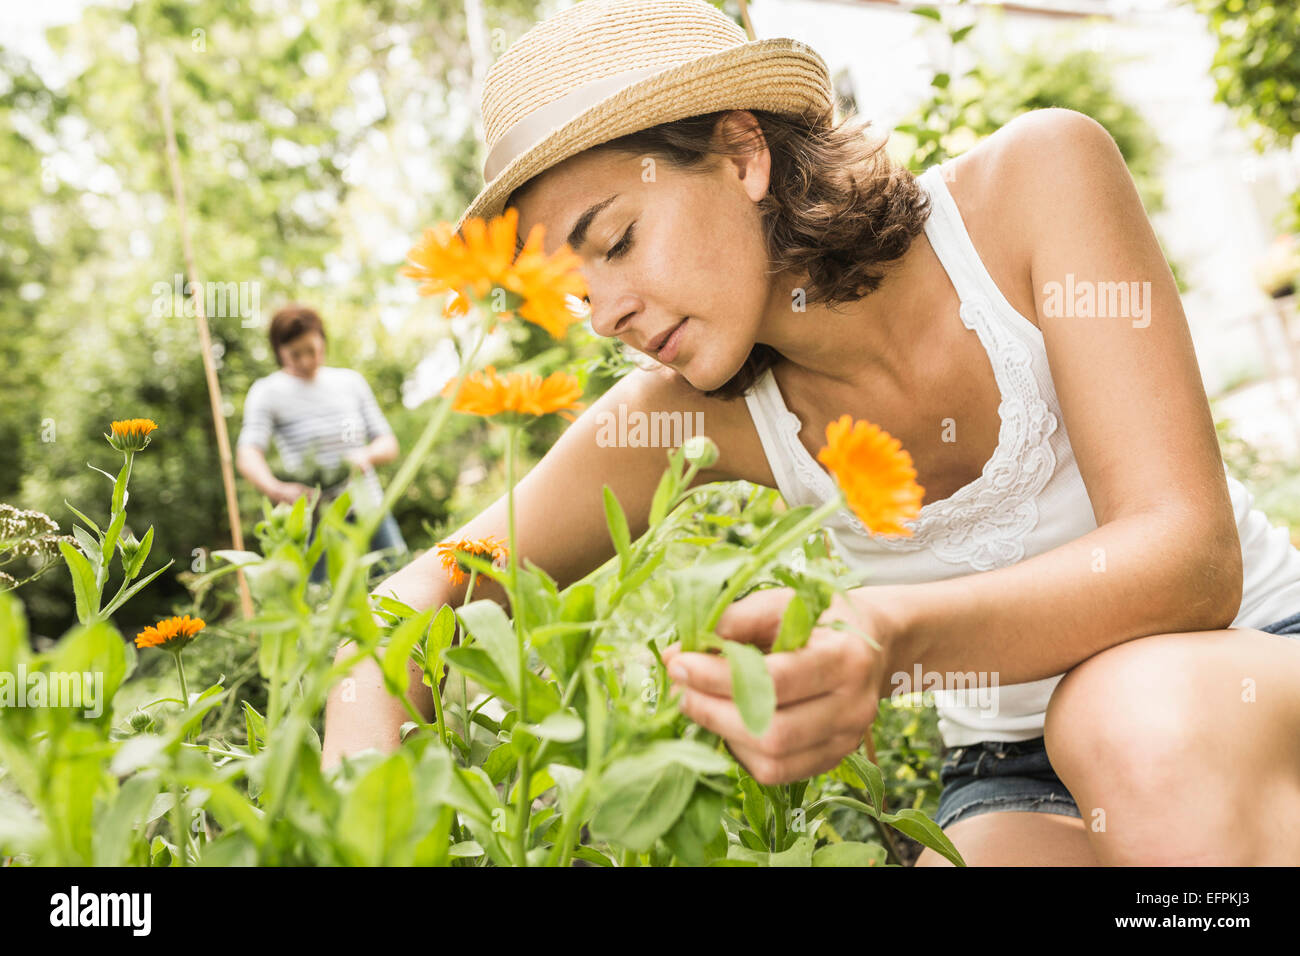 Mid adult woman tending to flowers in garden Stock Photo